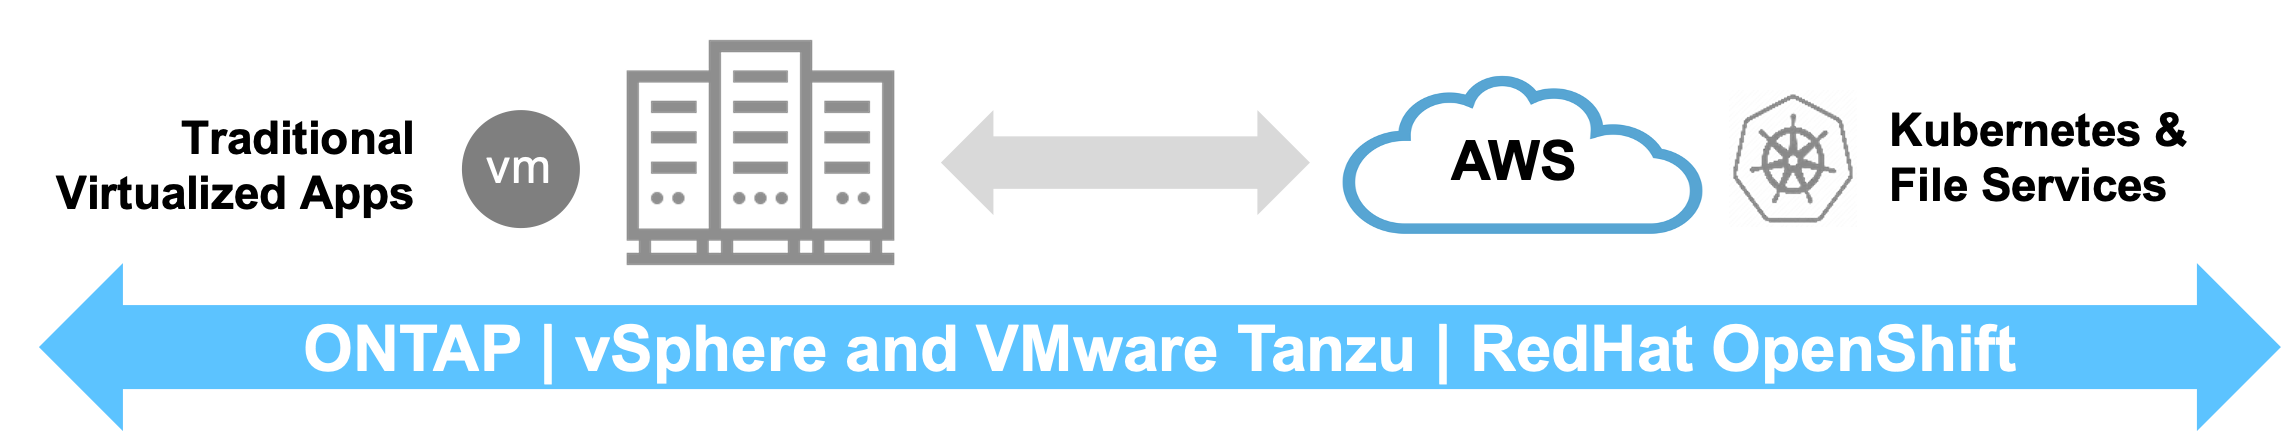 vmware-Story3a